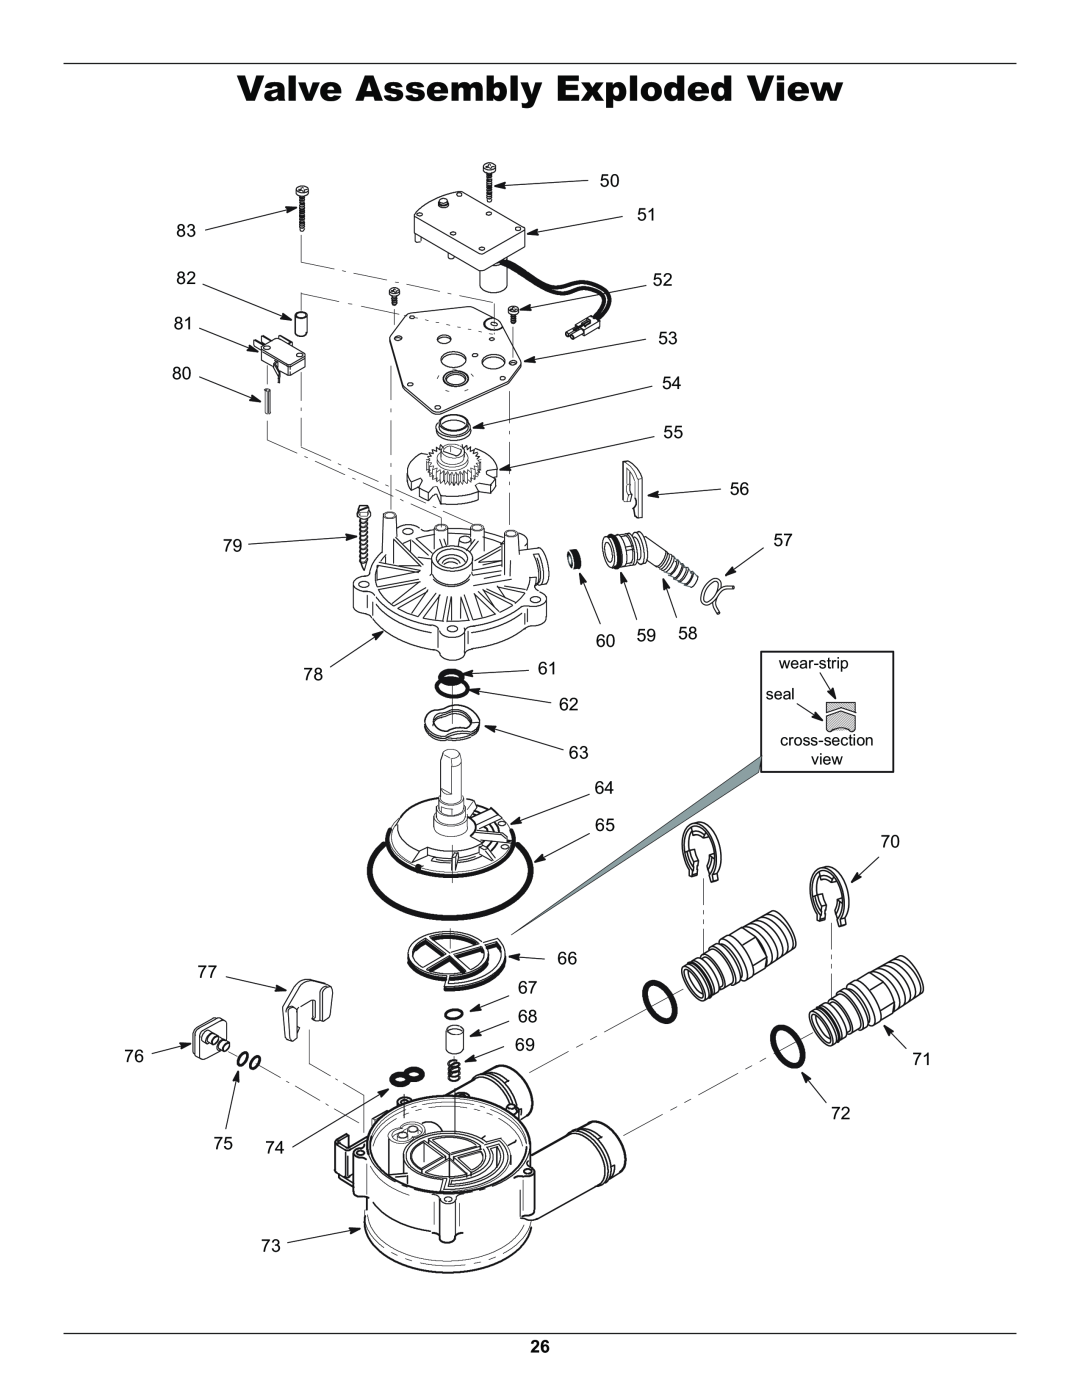 Whirlpool WHELJ1 manual Valve Assembly Exploded View, wear-strip seal cross-section view 